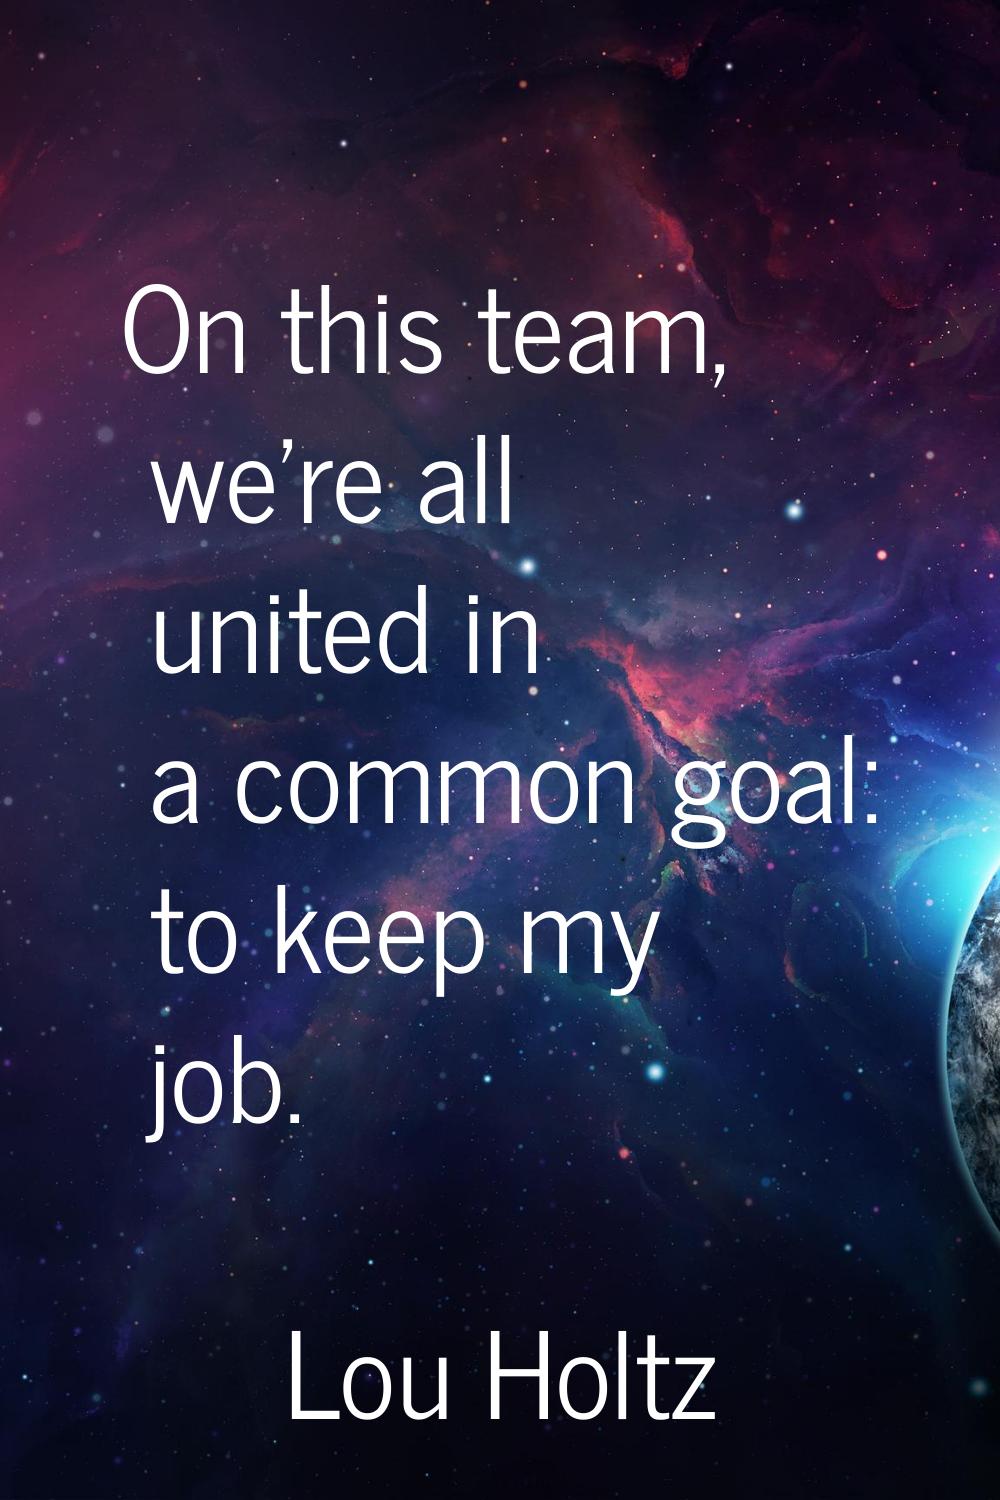 On this team, we're all united in a common goal: to keep my job.